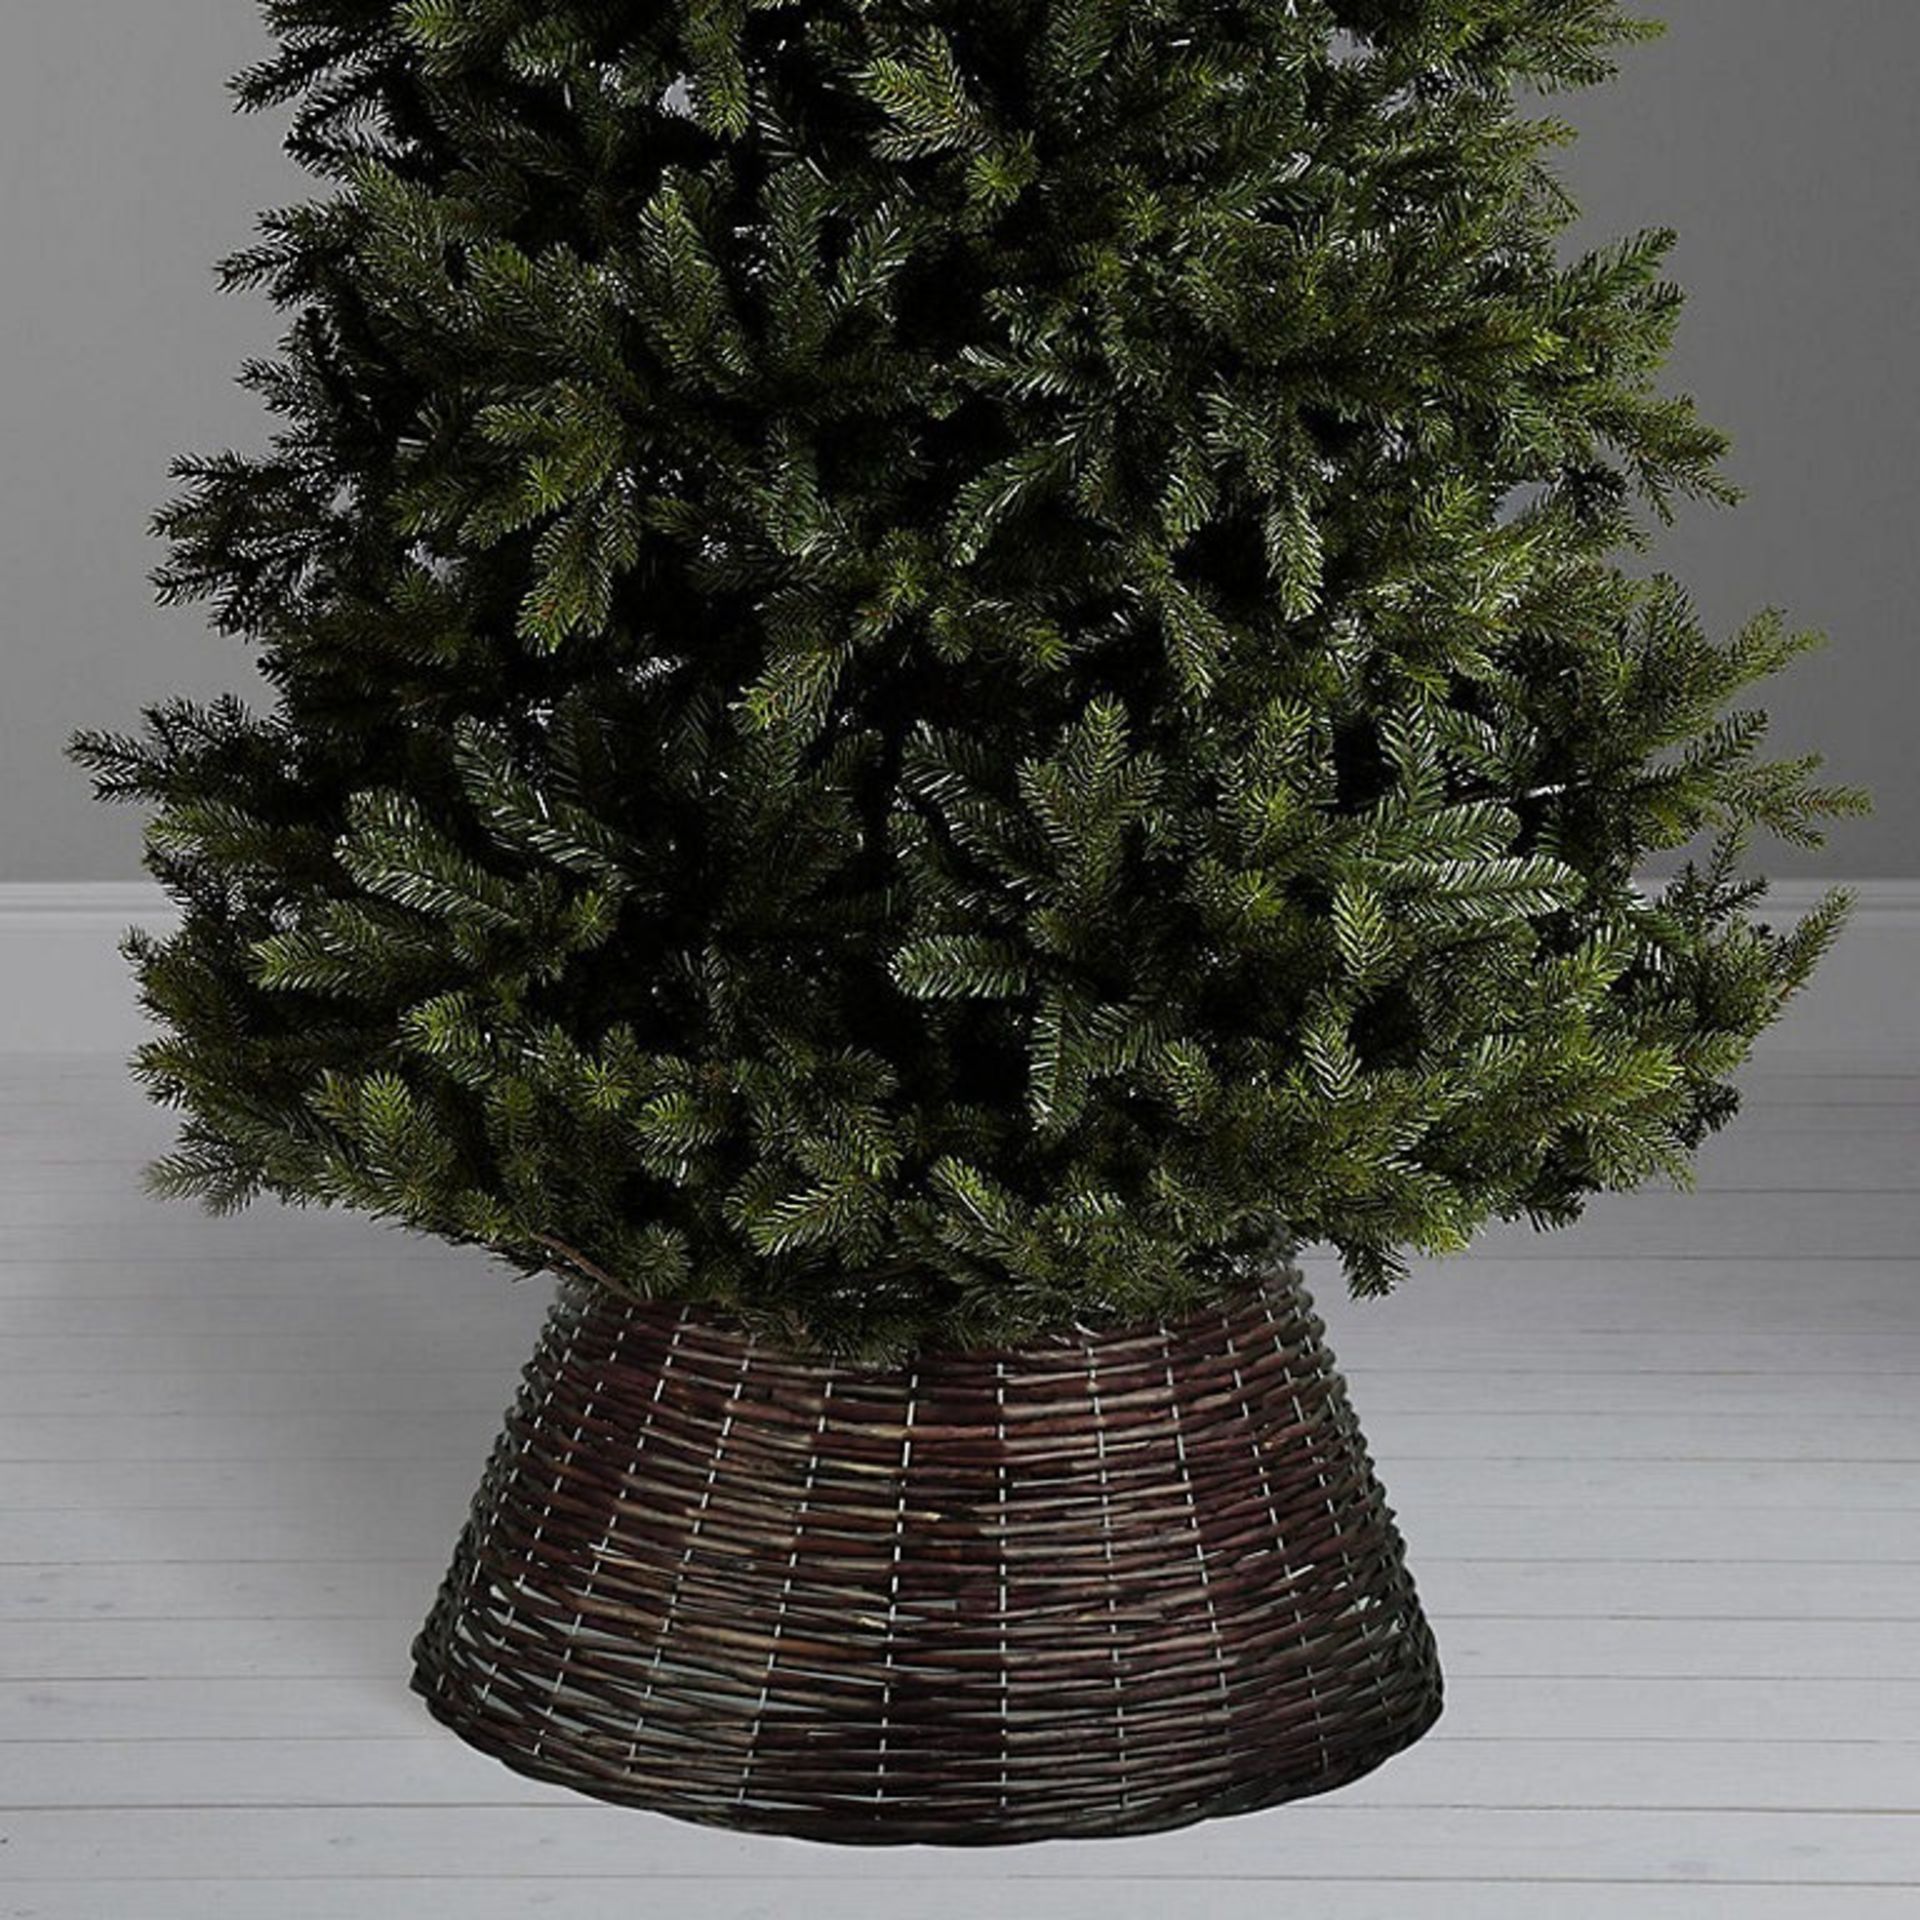 SMALL BROWN Willow Xmas Tree Skirt Base Cover - ER47